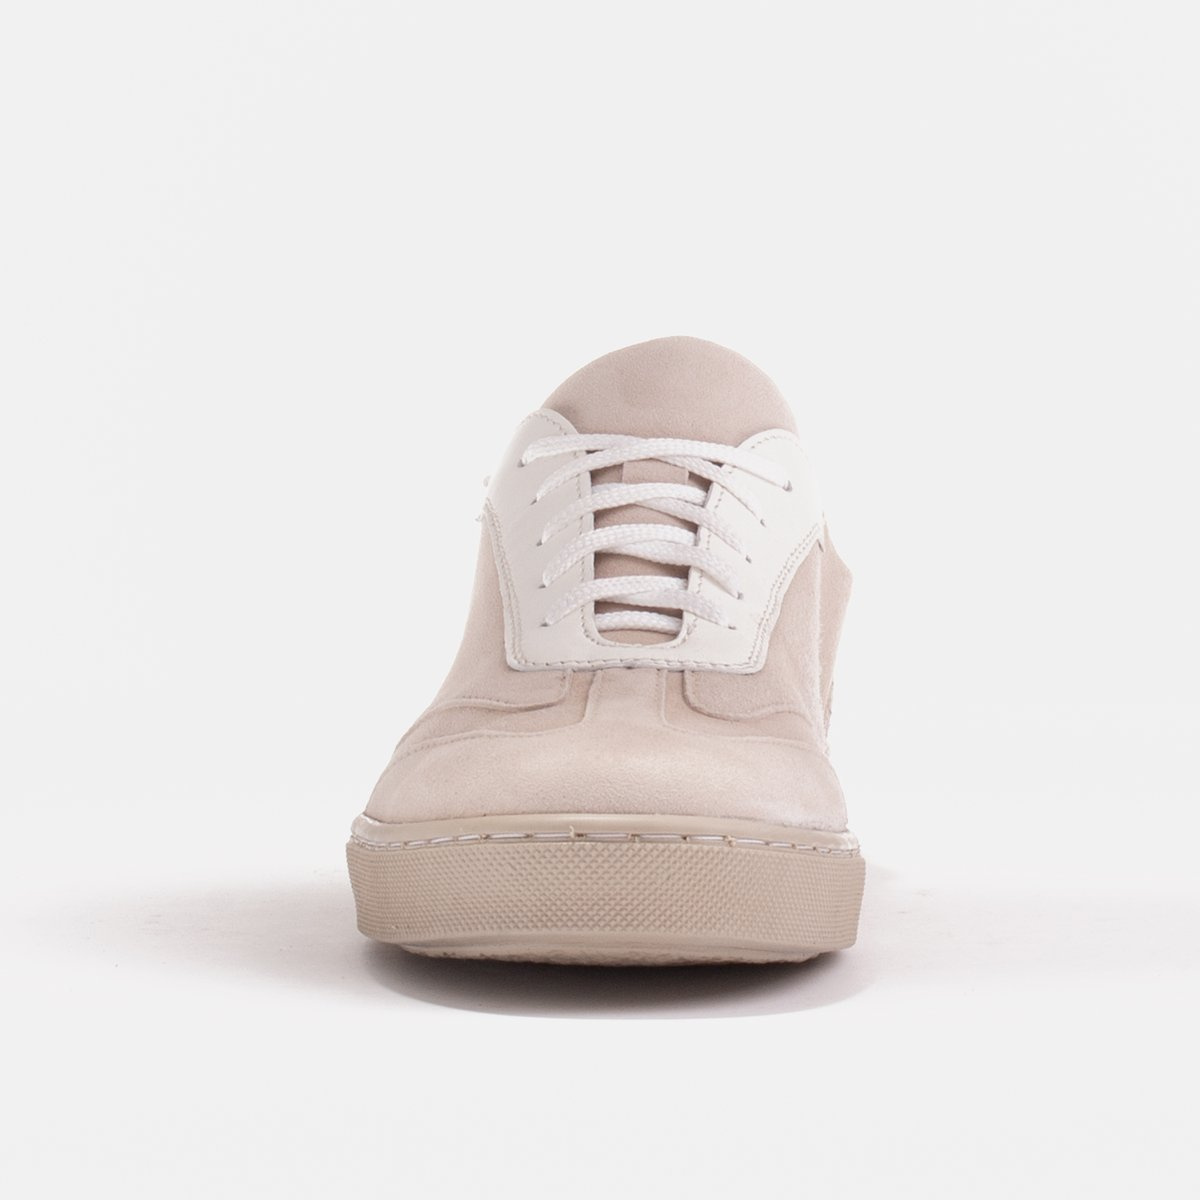 Sports sneakers made of high-quality natural suede